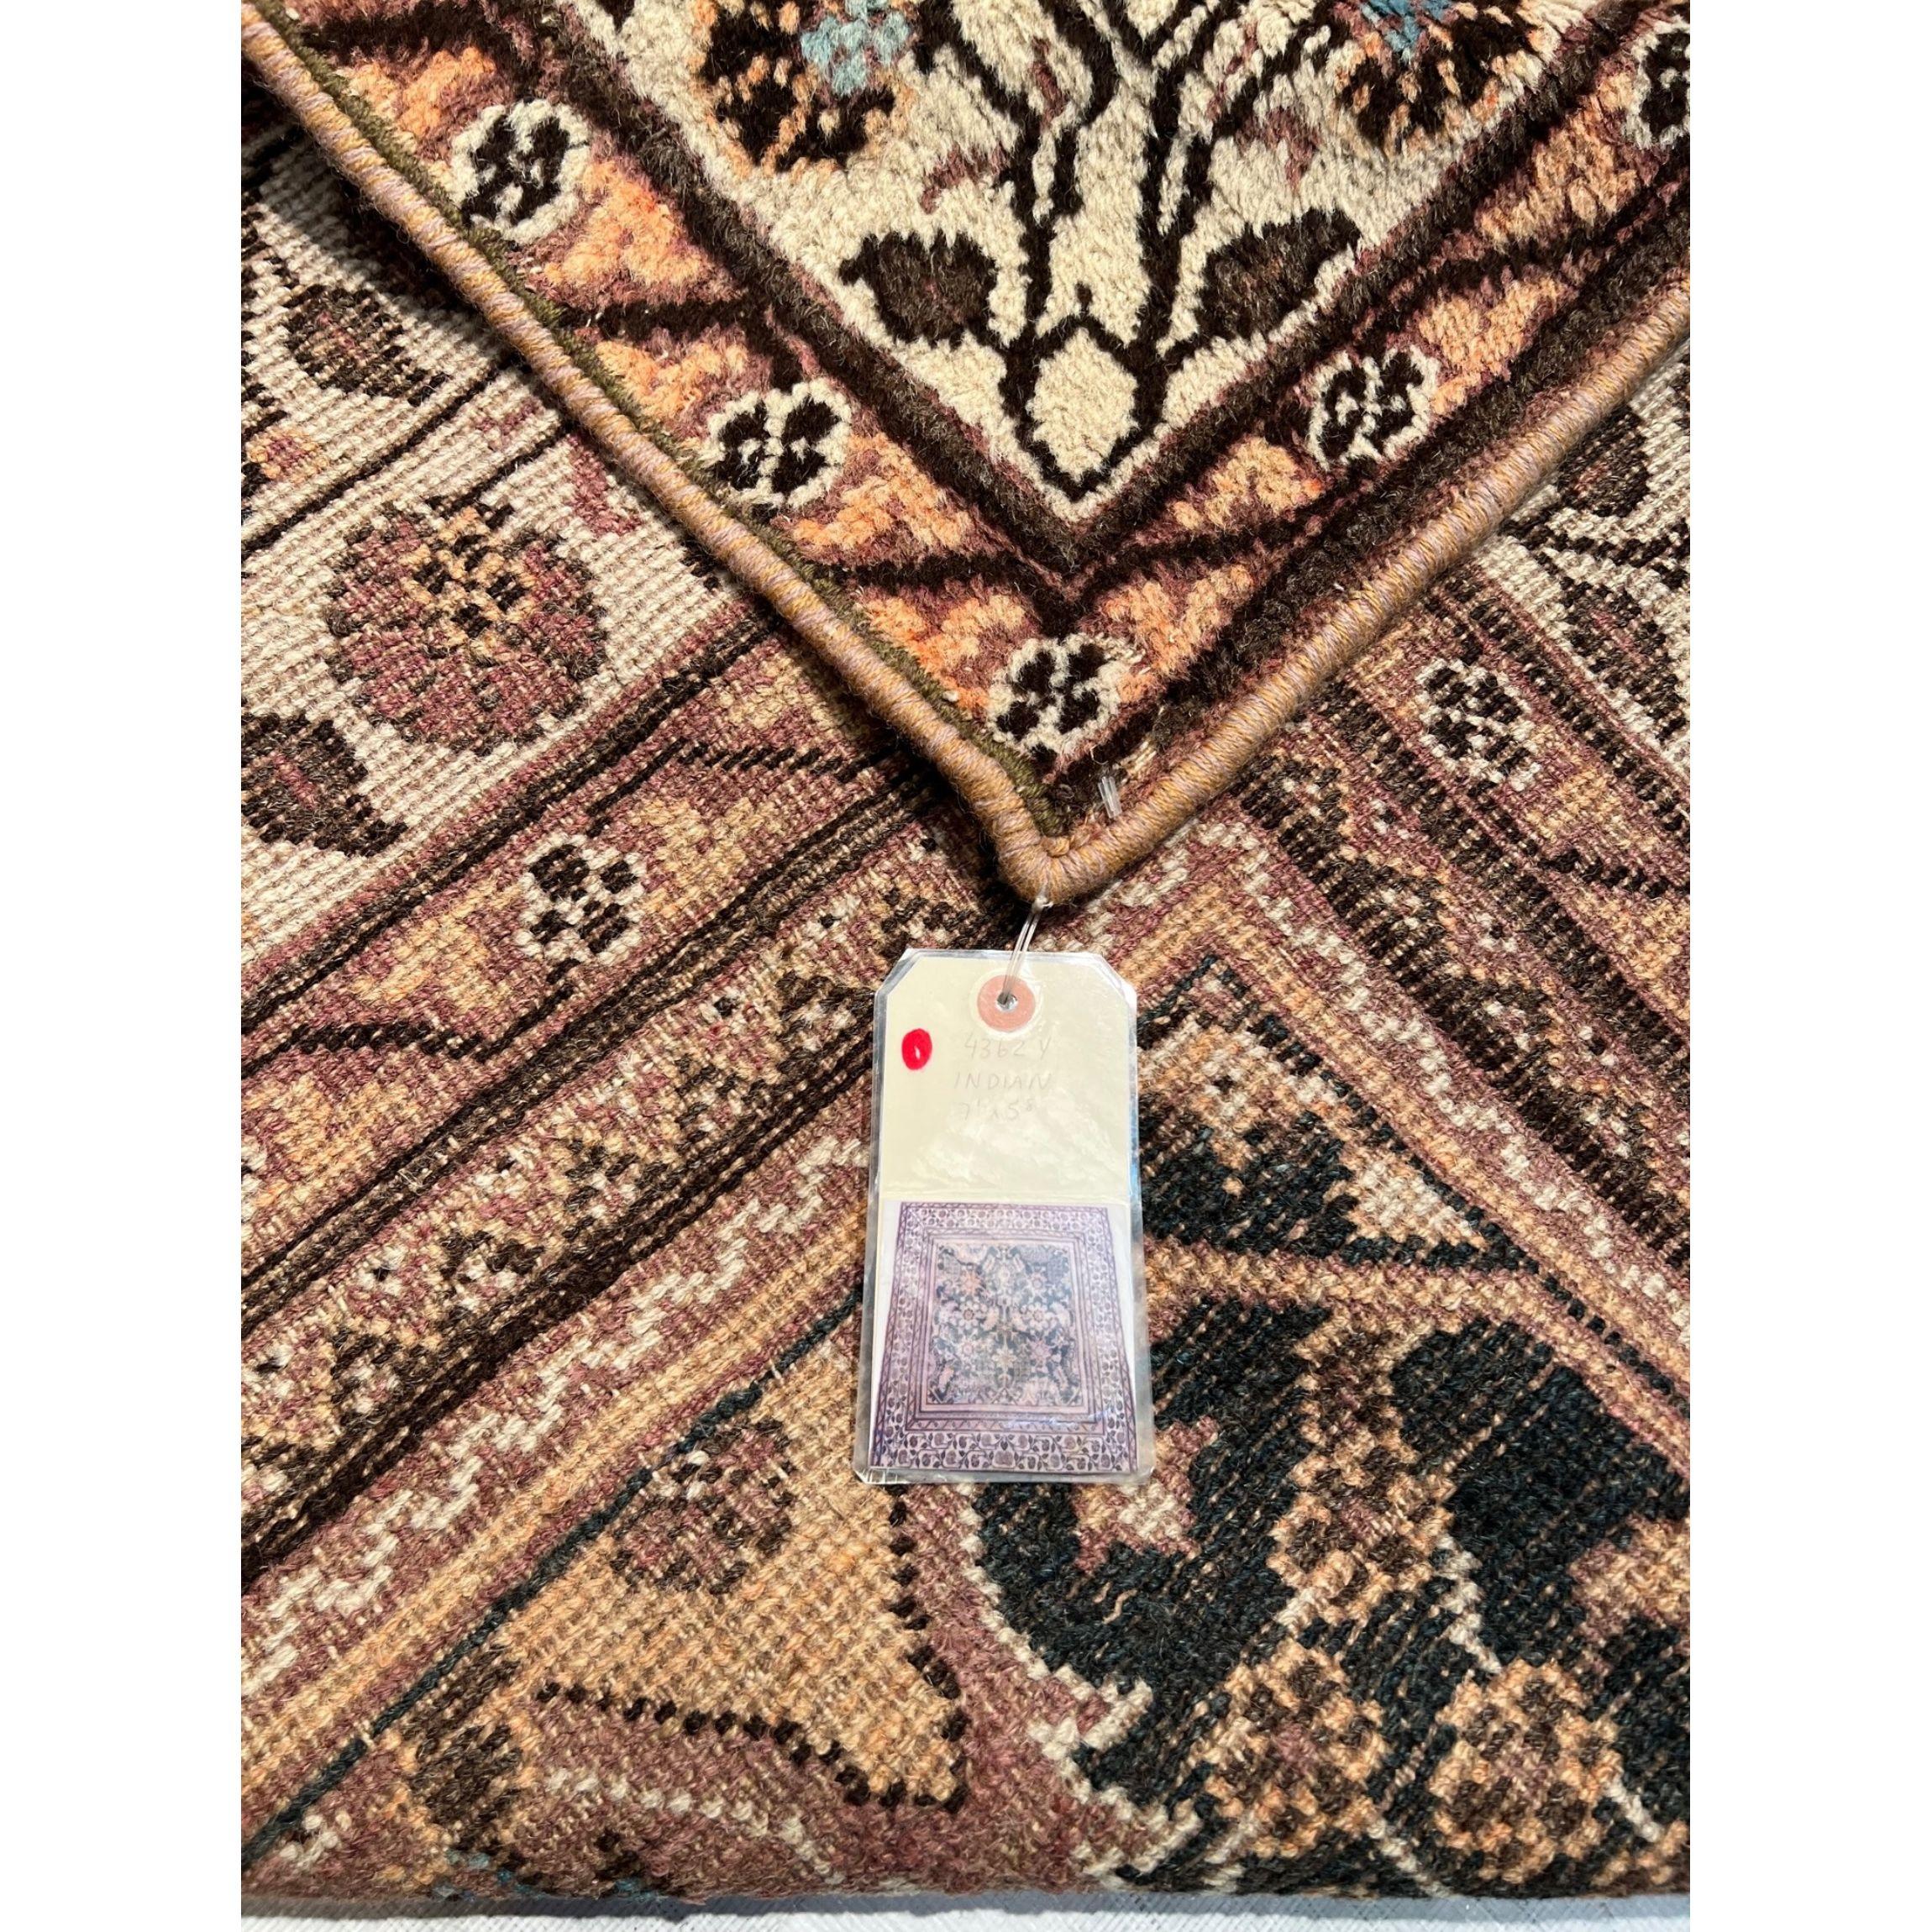 Antique Indian Rug 7.1x5.8 In Good Condition For Sale In Los Angeles, US